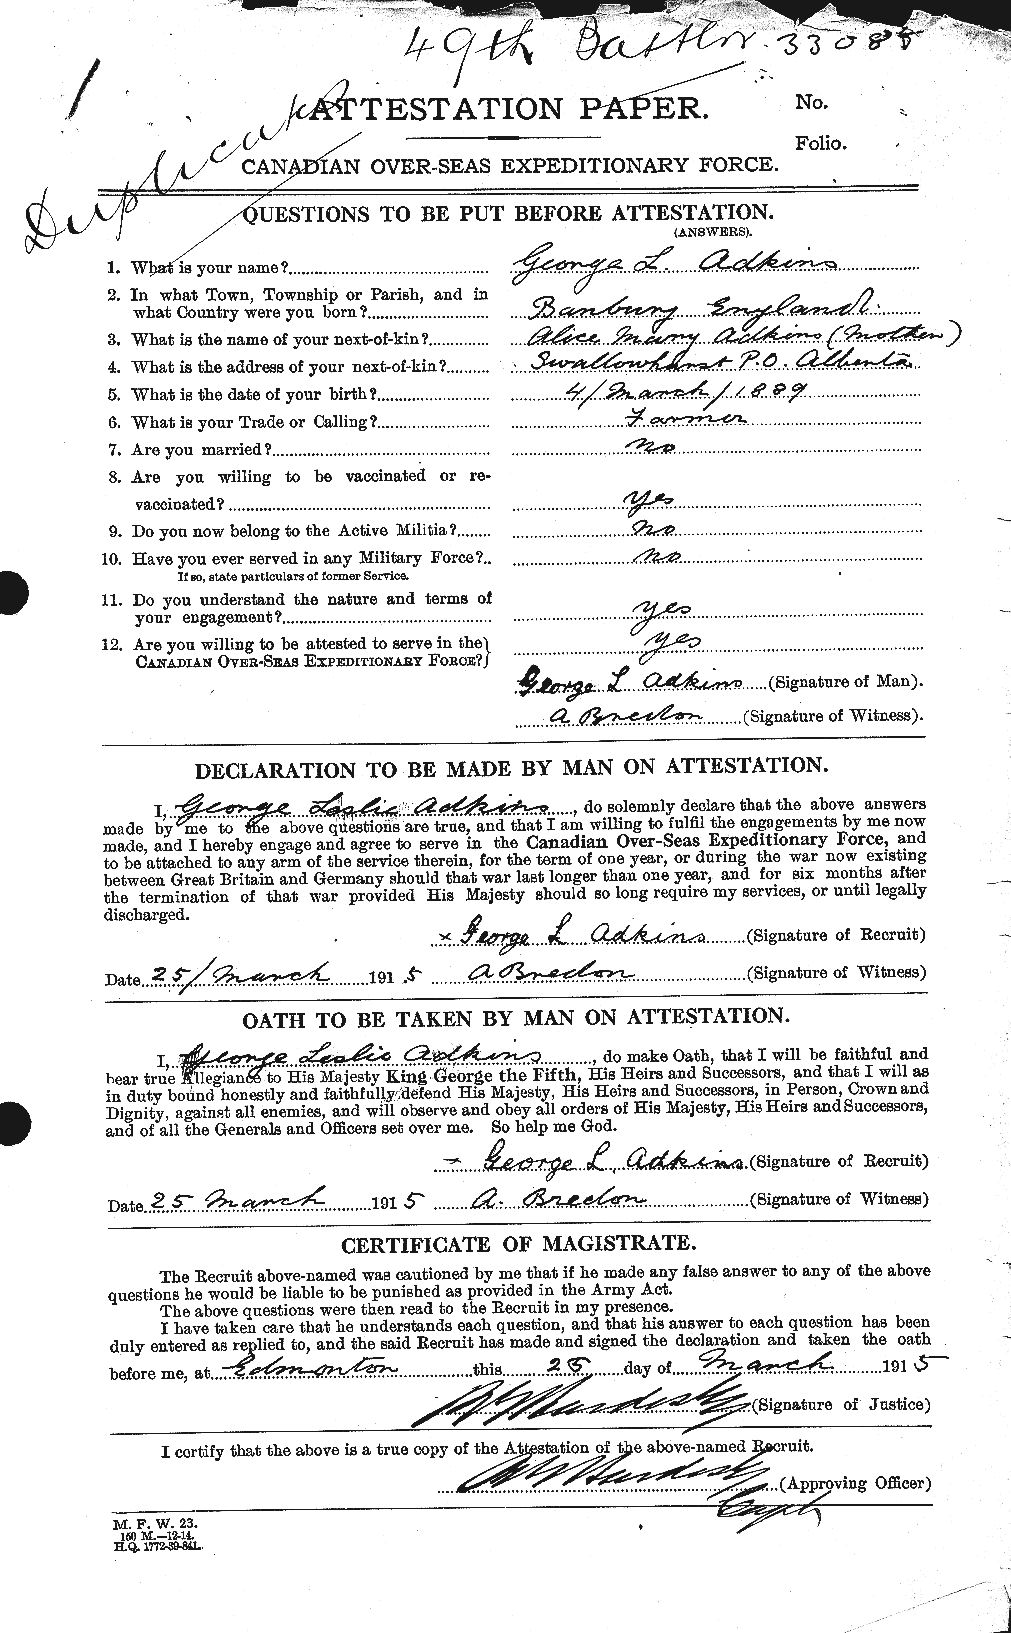 Personnel Records of the First World War - CEF 202834a